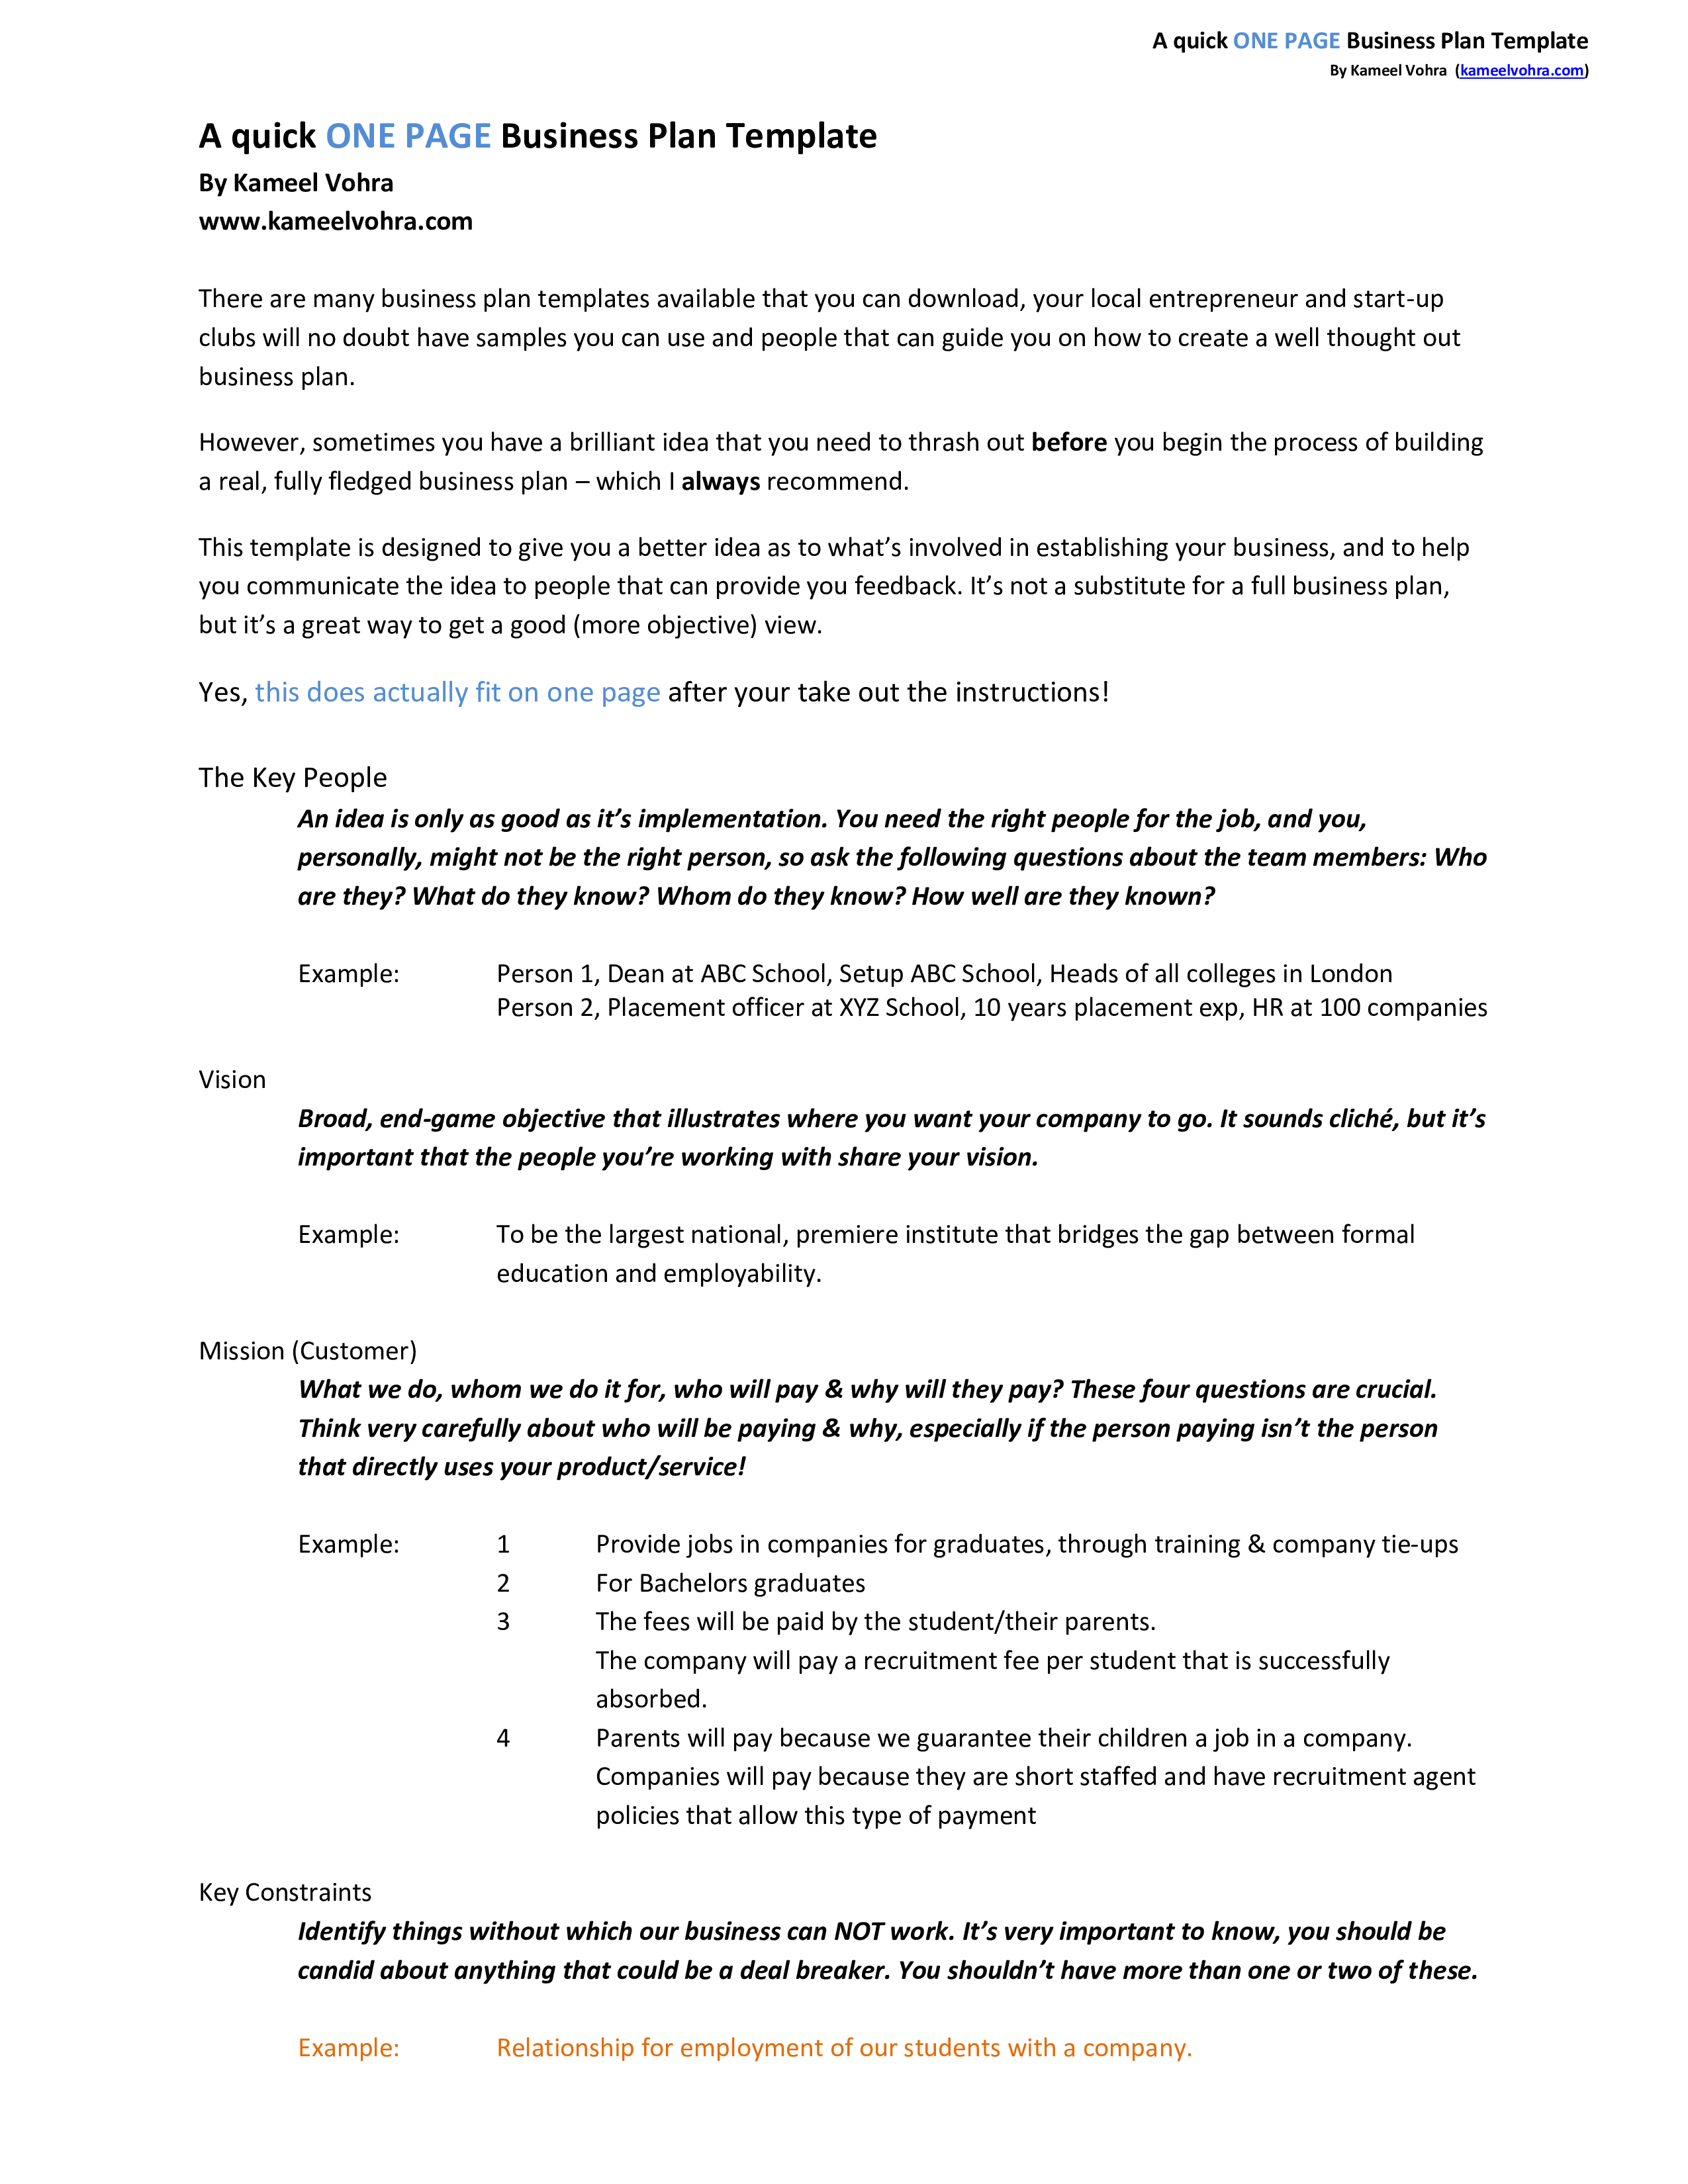 A Quick One Page Business Plan Template - Eloquens Throughout Real Estate Investment Business Plan Template